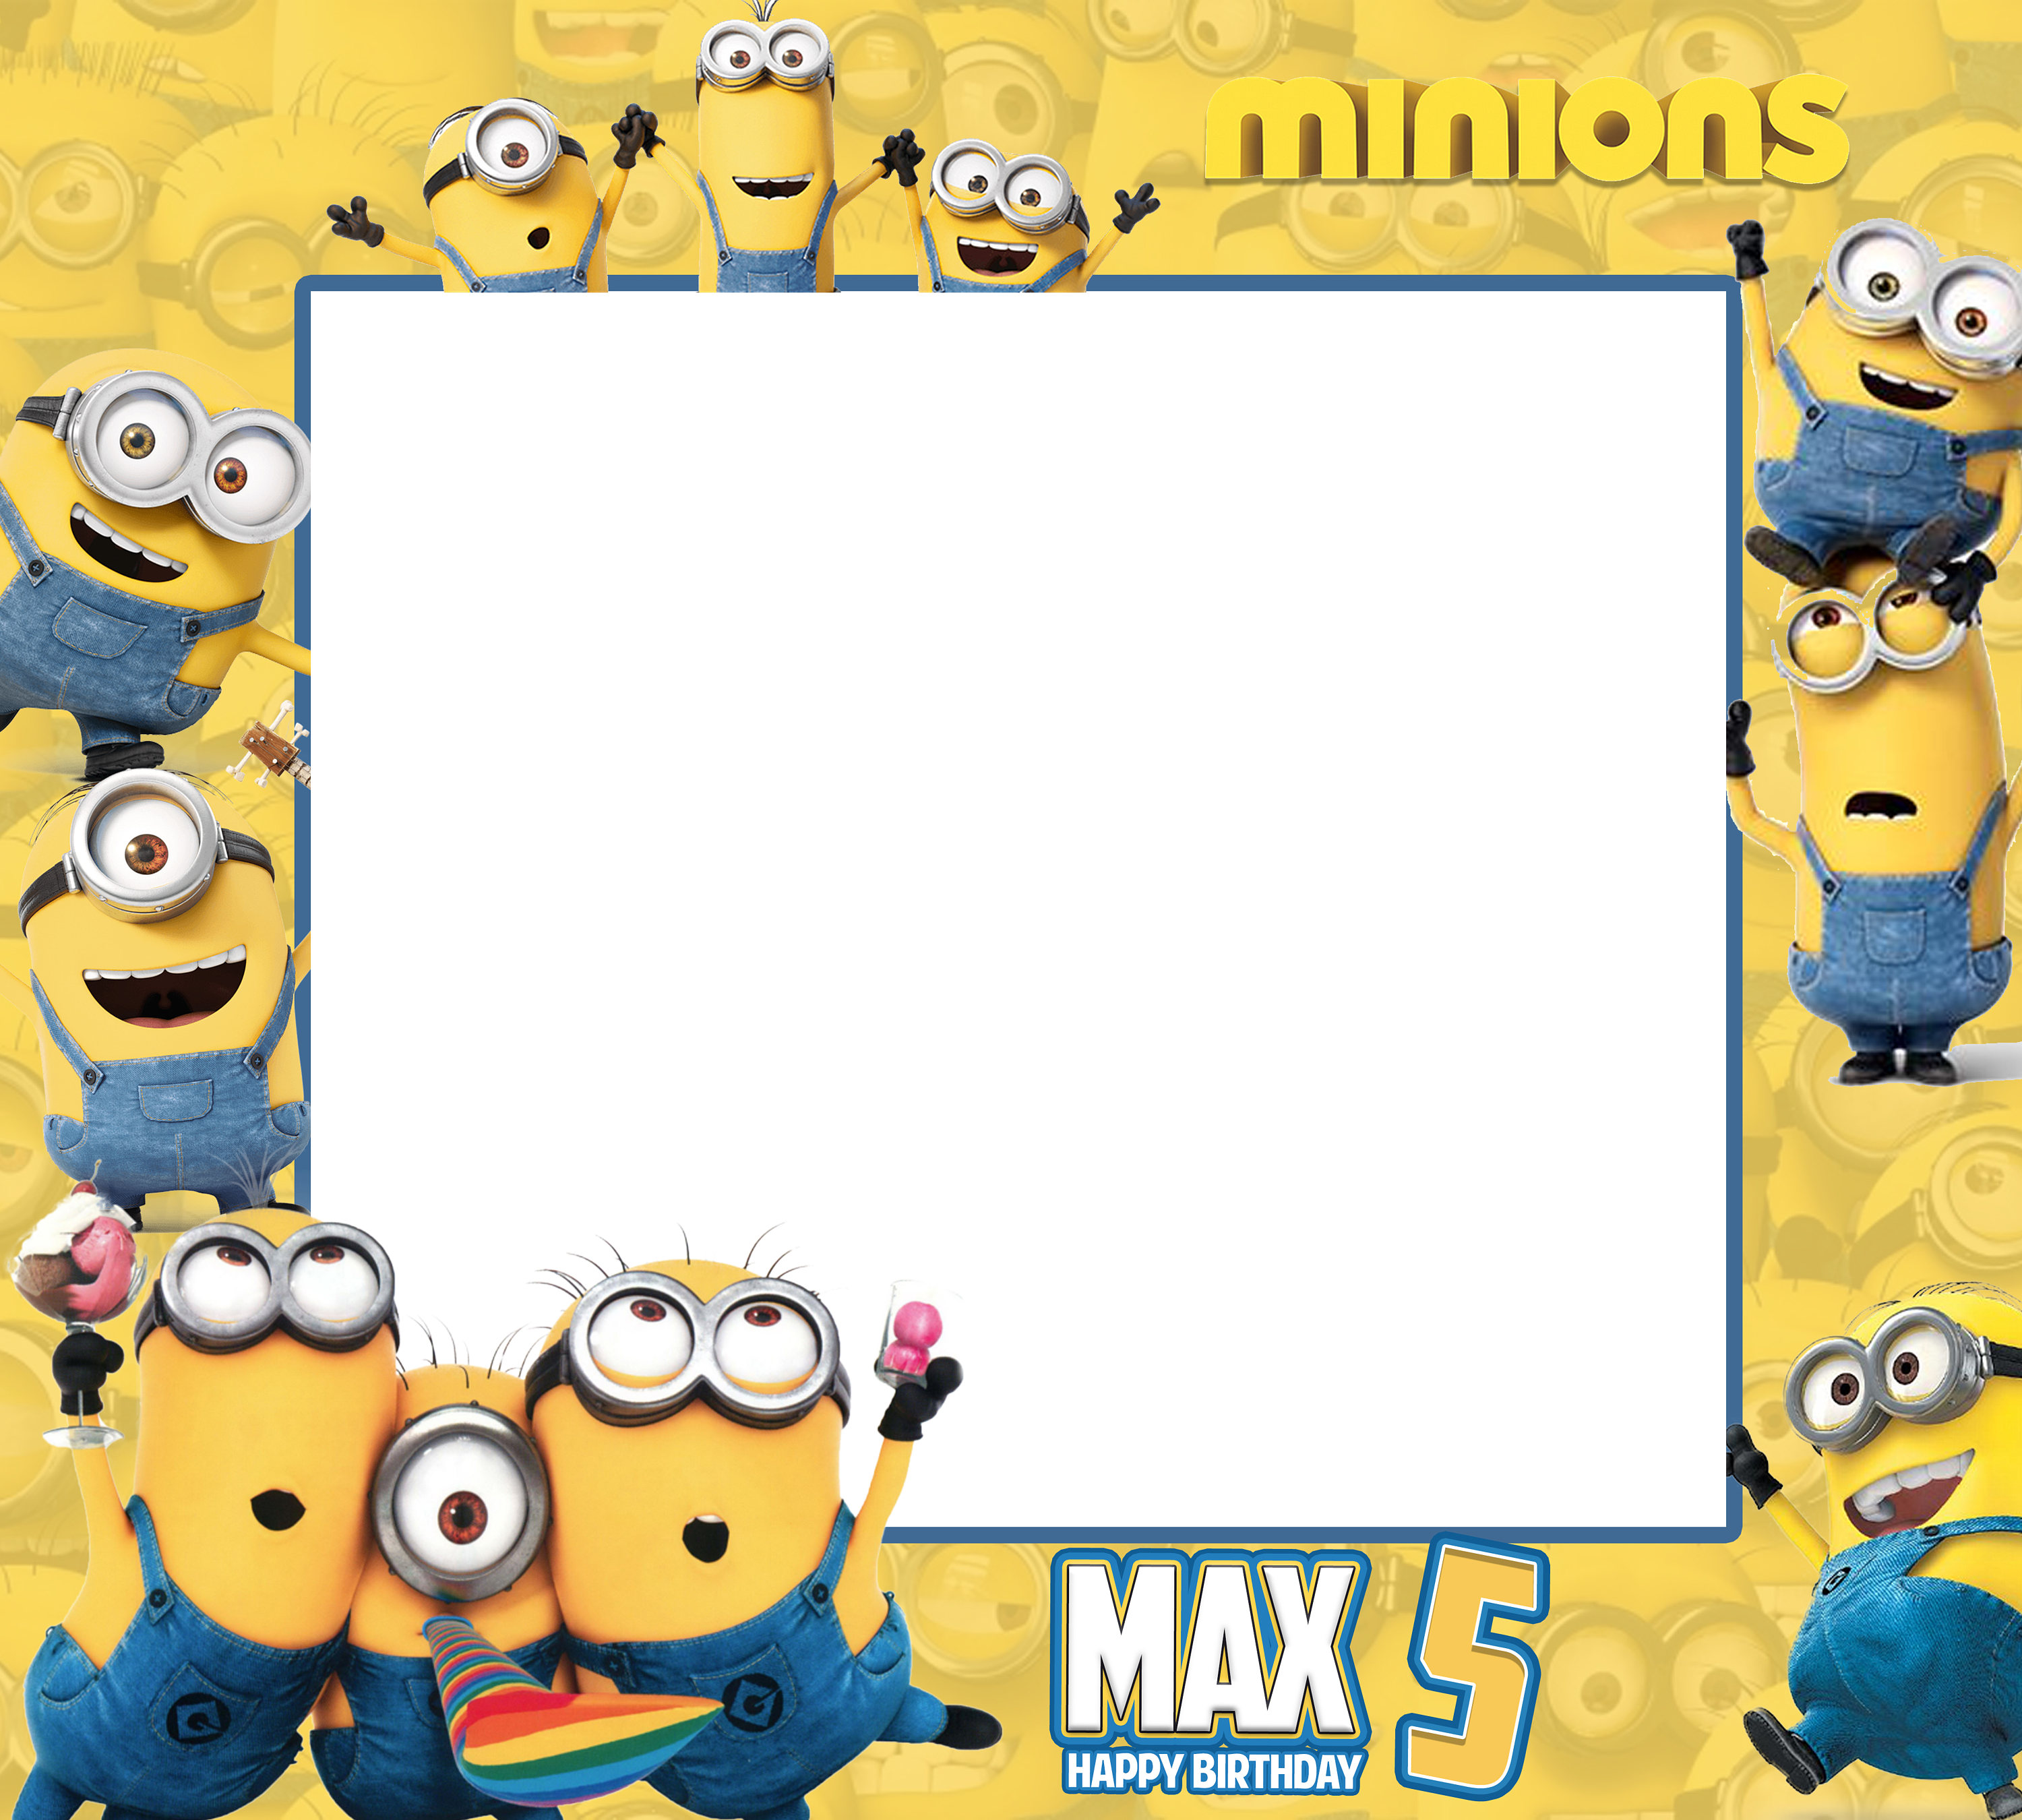 Minion Frame Wallpapers High Quality | Download Free